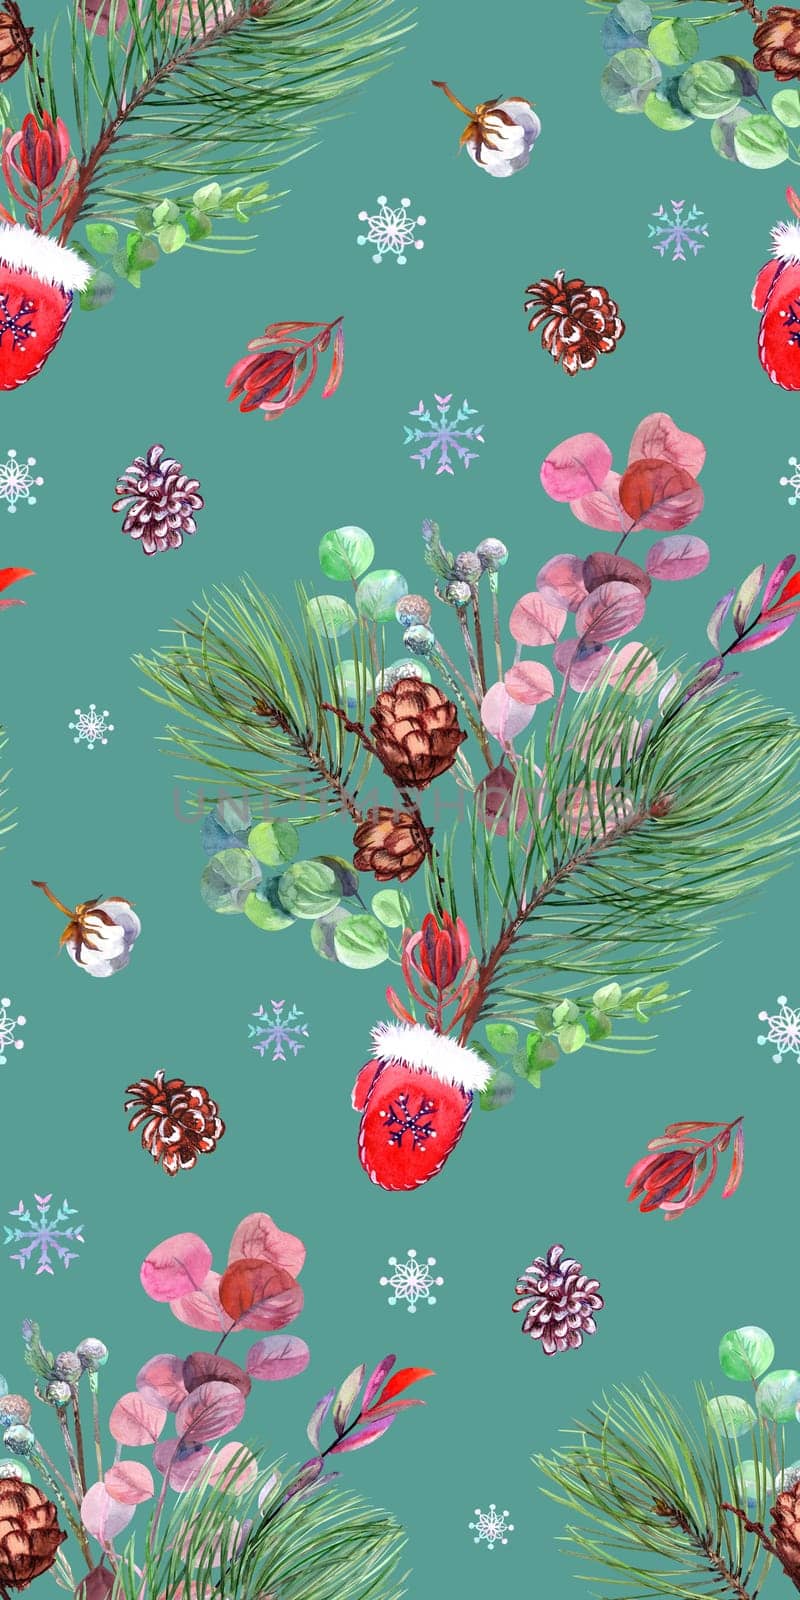 watercolor Christmas seamless pattern with varzhka and winter bouquet with dried flowers and fir branches on turquoise background for wrapping paper and fabric